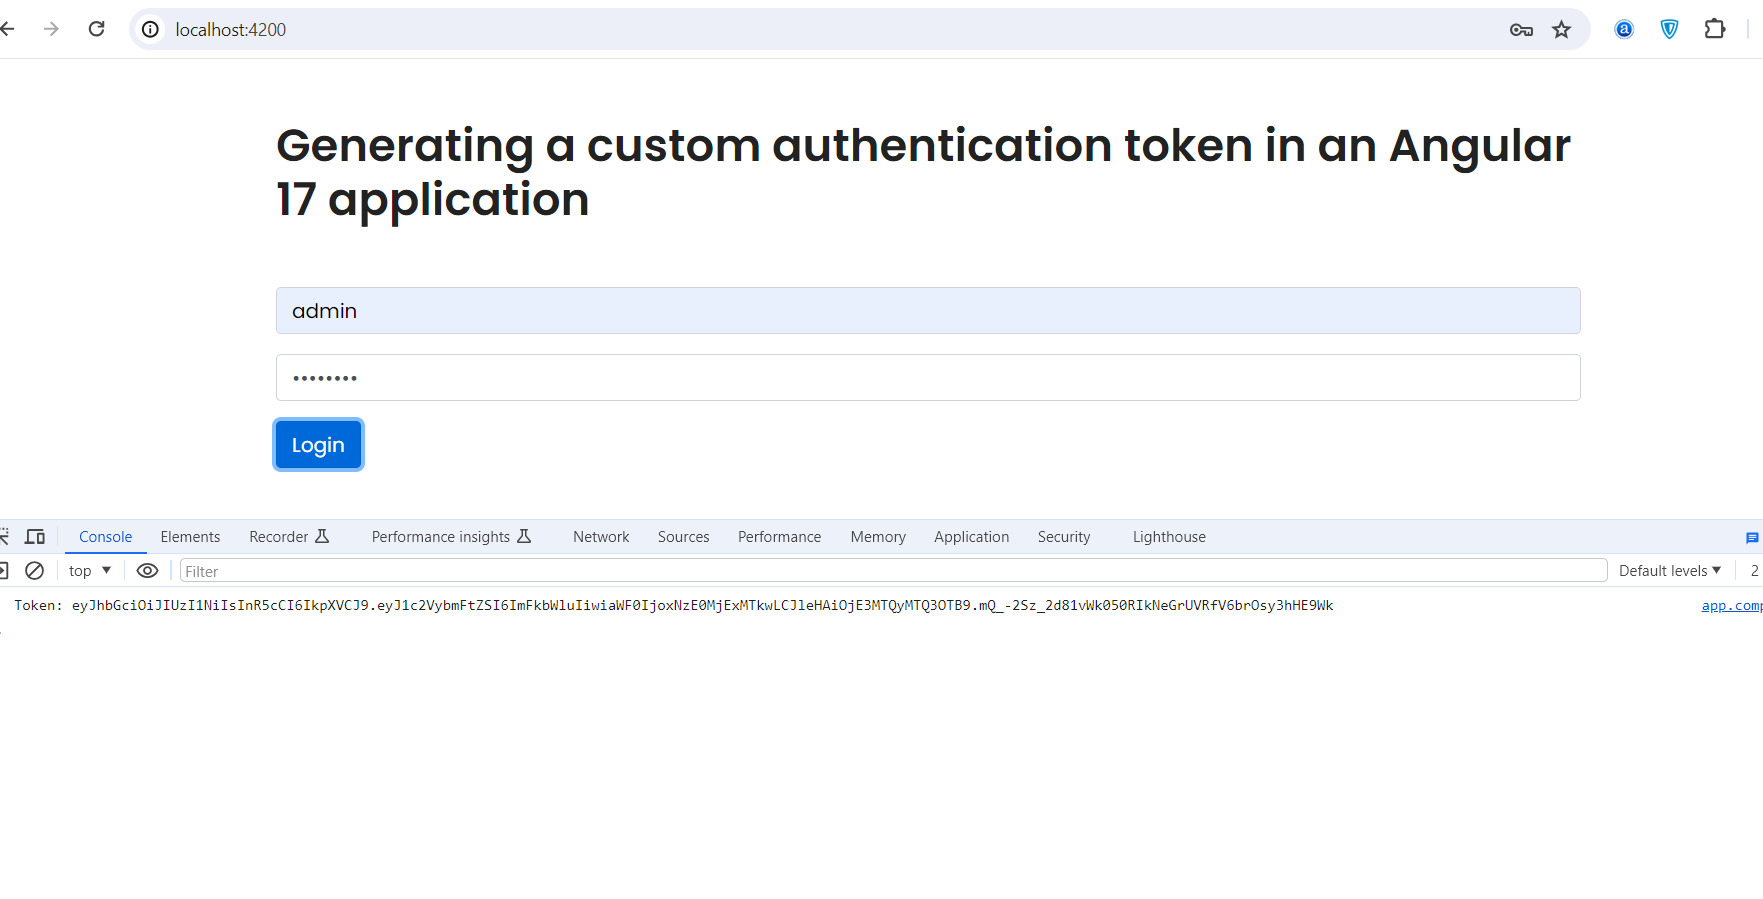 Generating a custom authentication token in an Angular 17 application